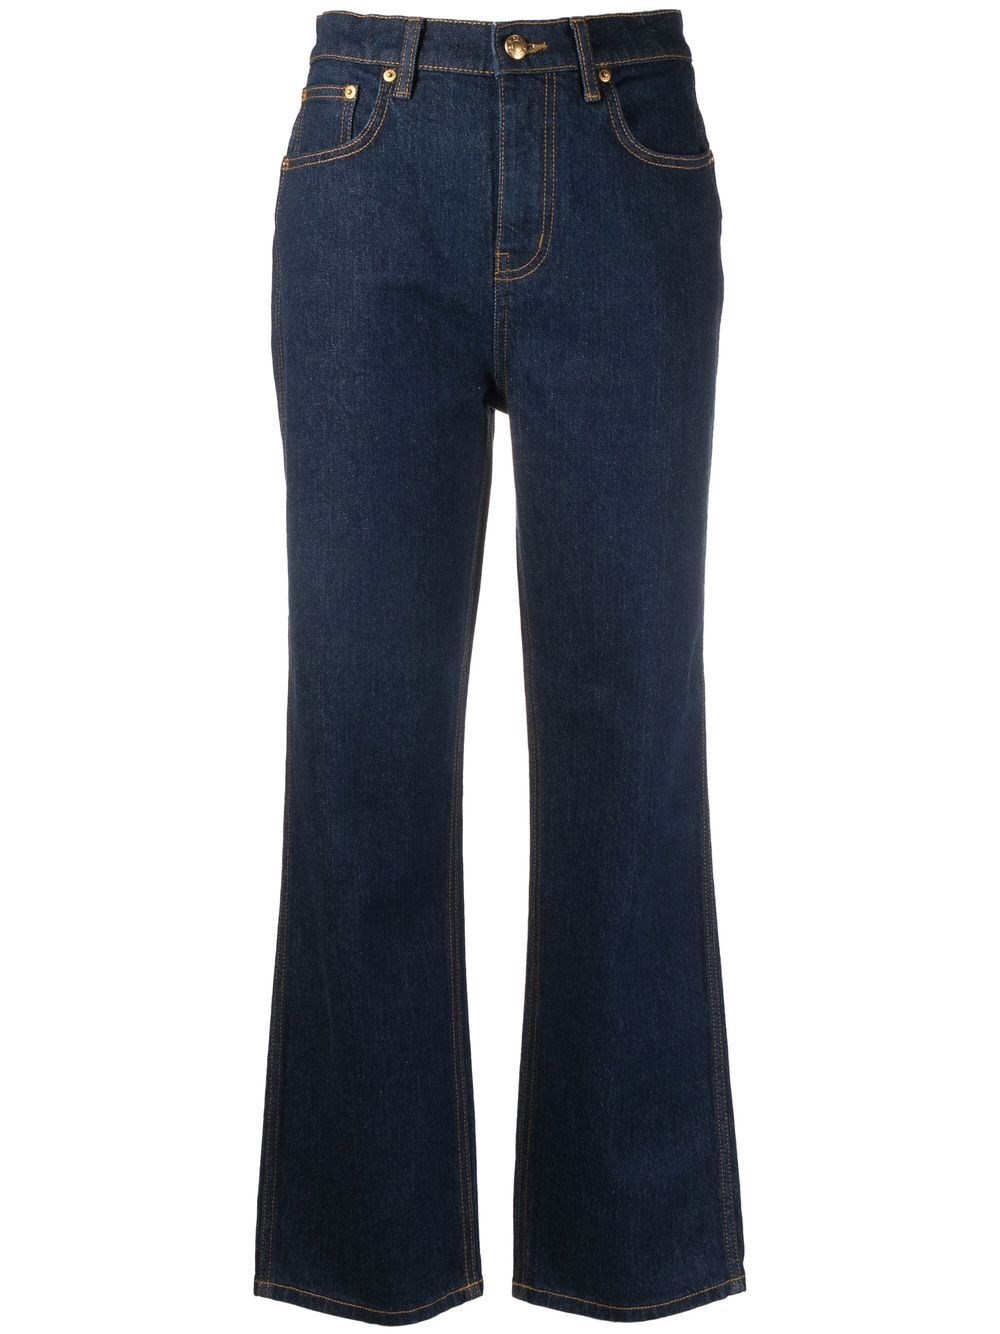 TORY BURCH HIGH-RISE STRAIGHT JEANS